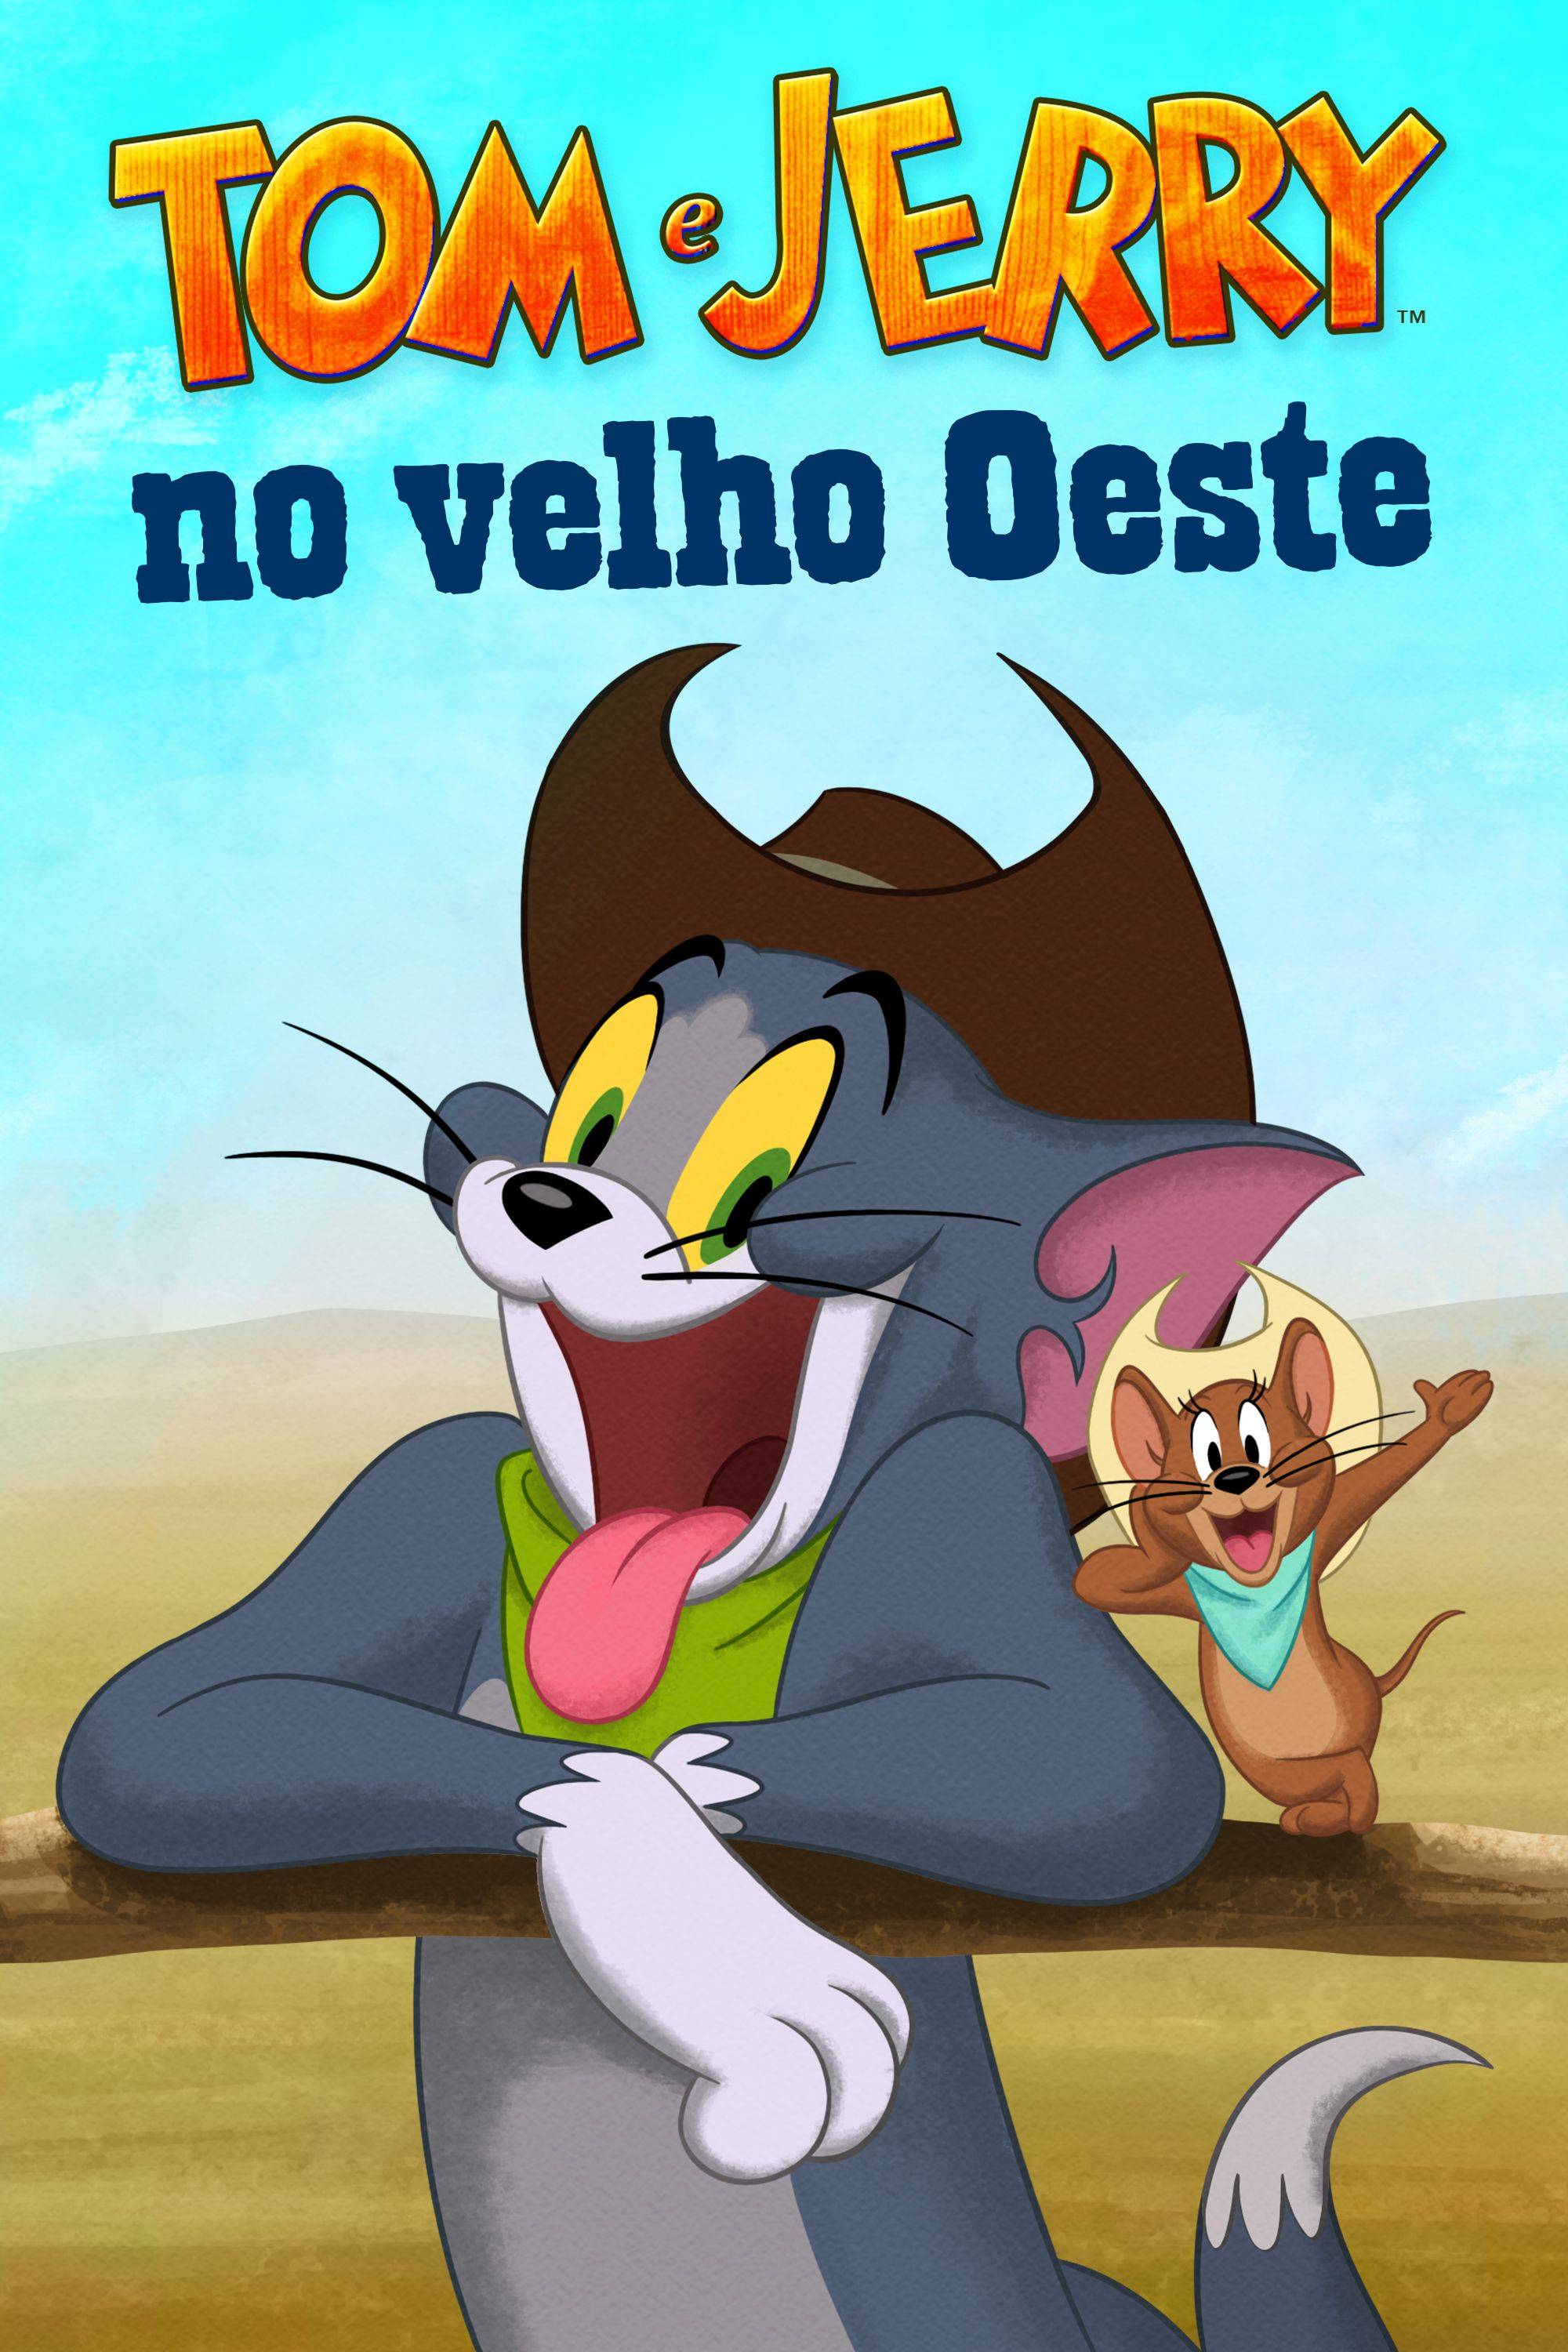 Best of Tom and jerry full episodes online